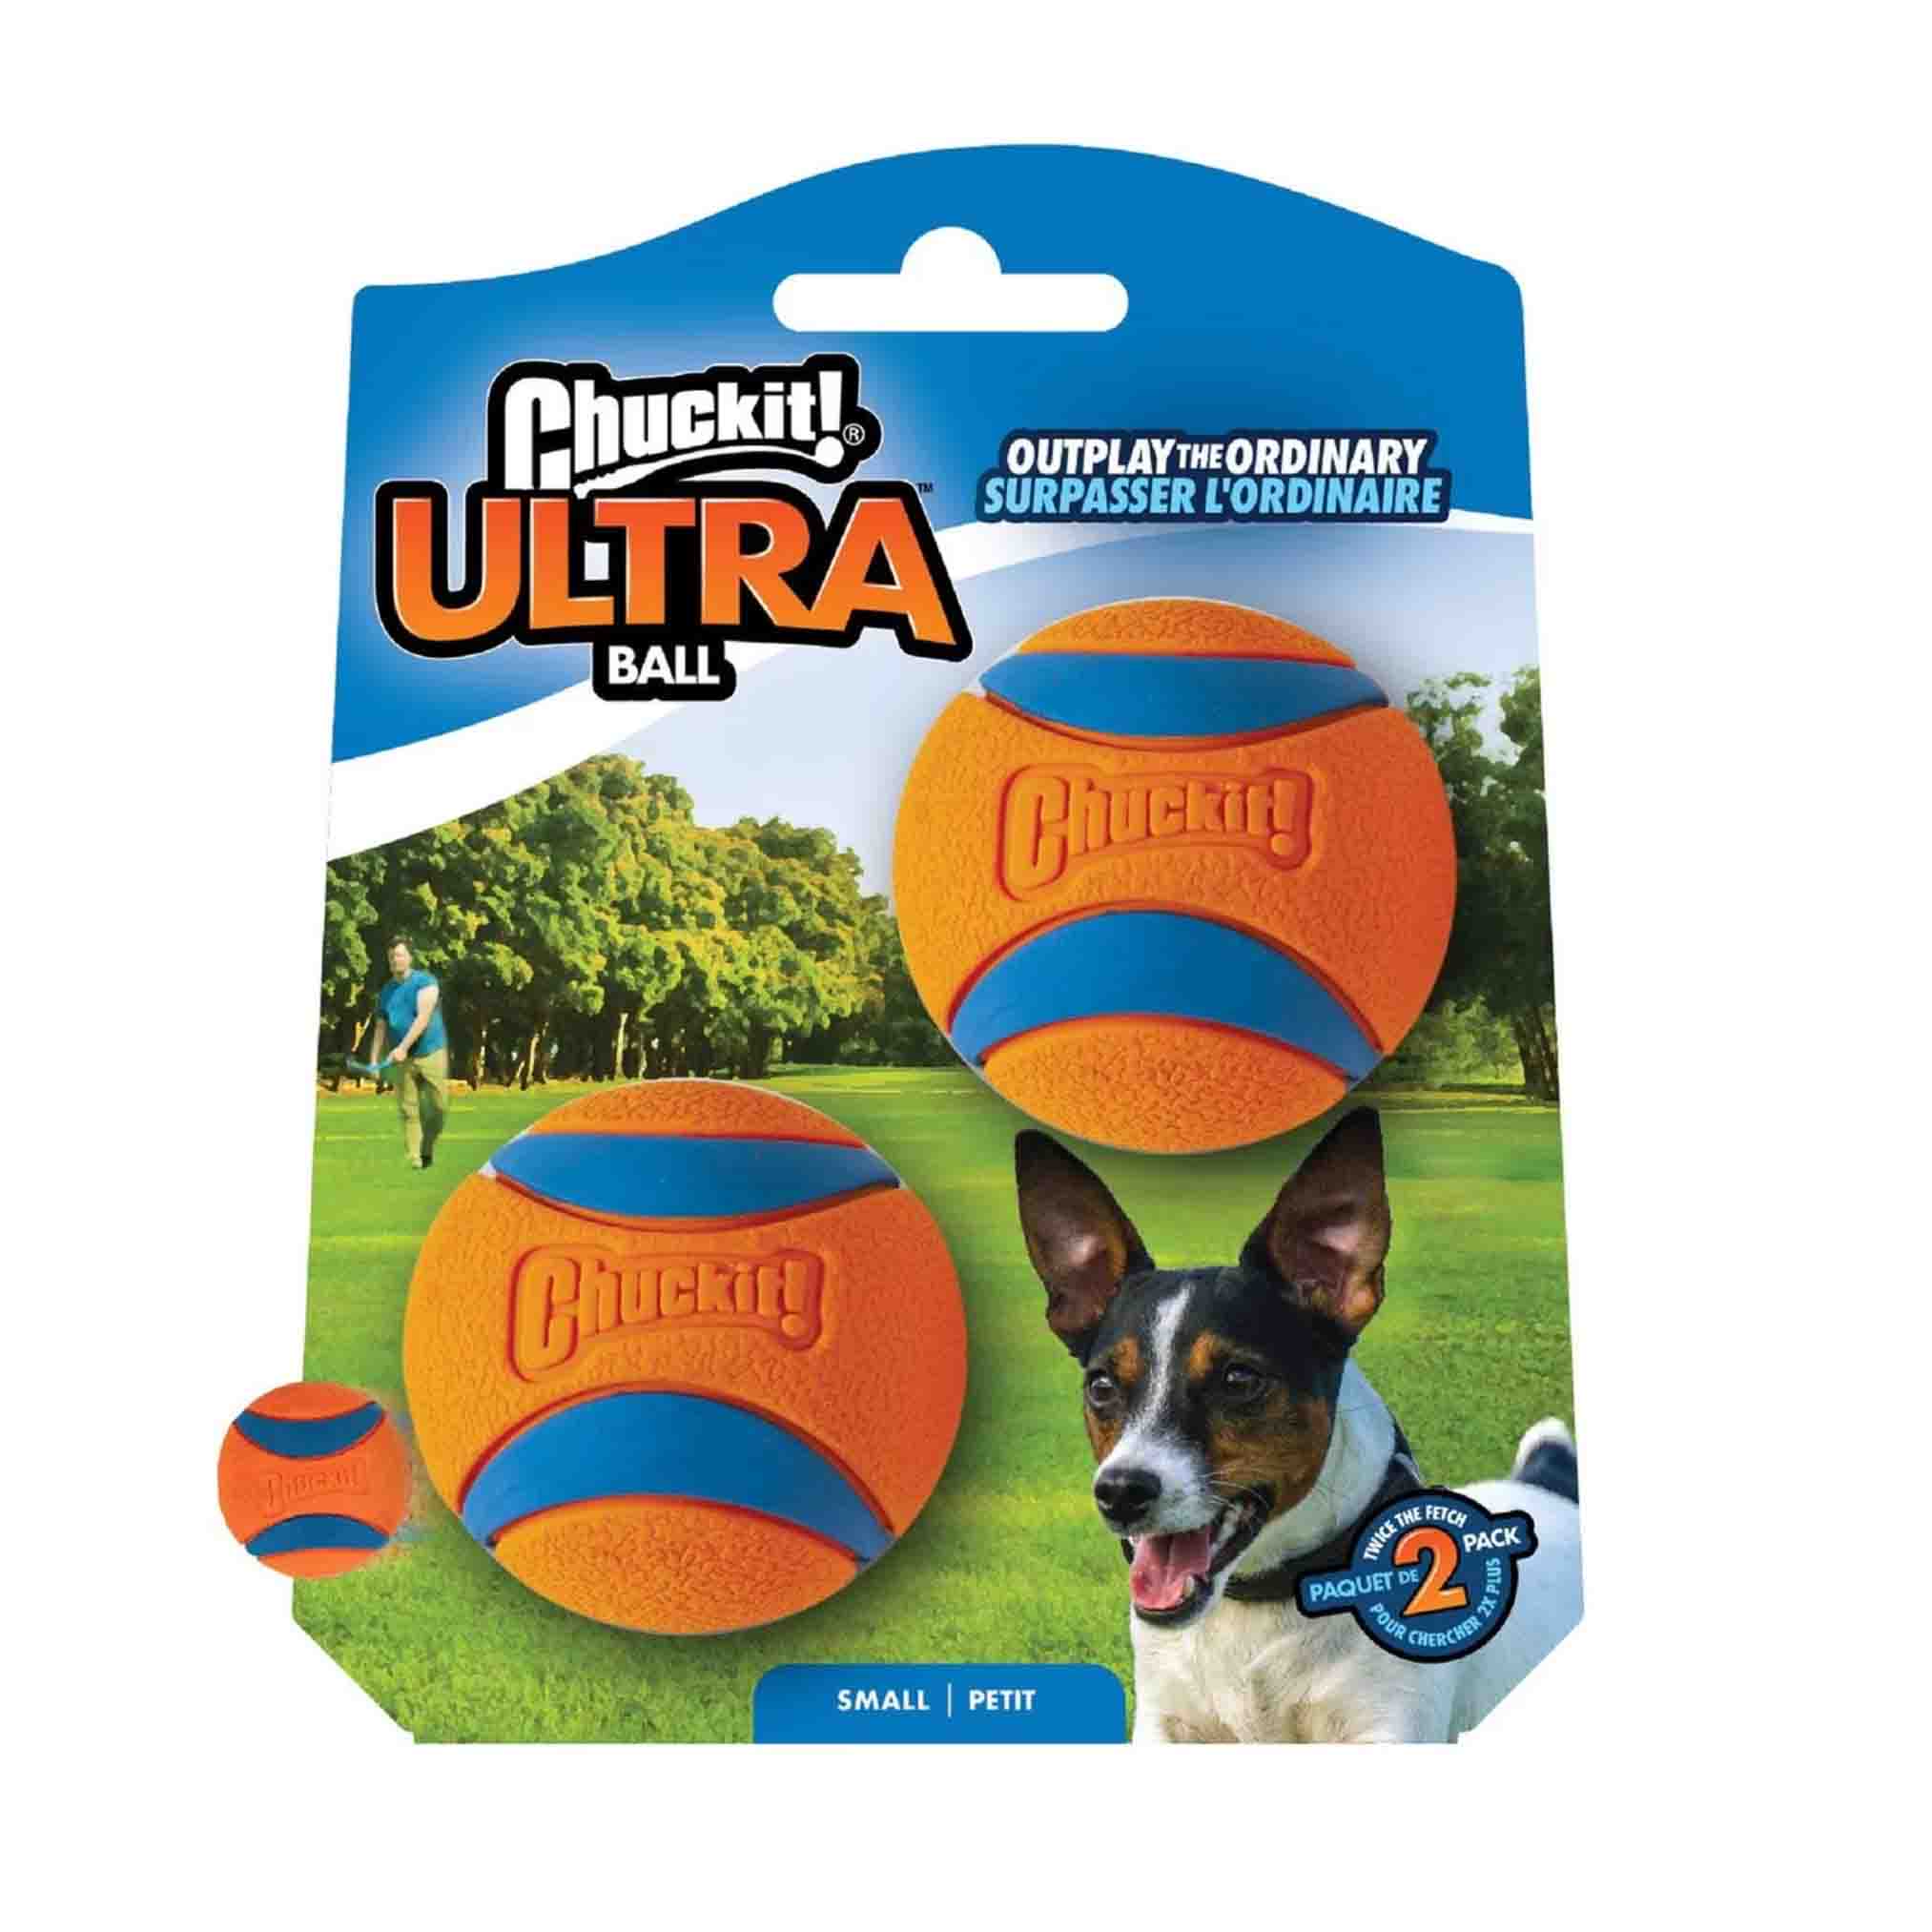 pack of two orange and blue balls for dog